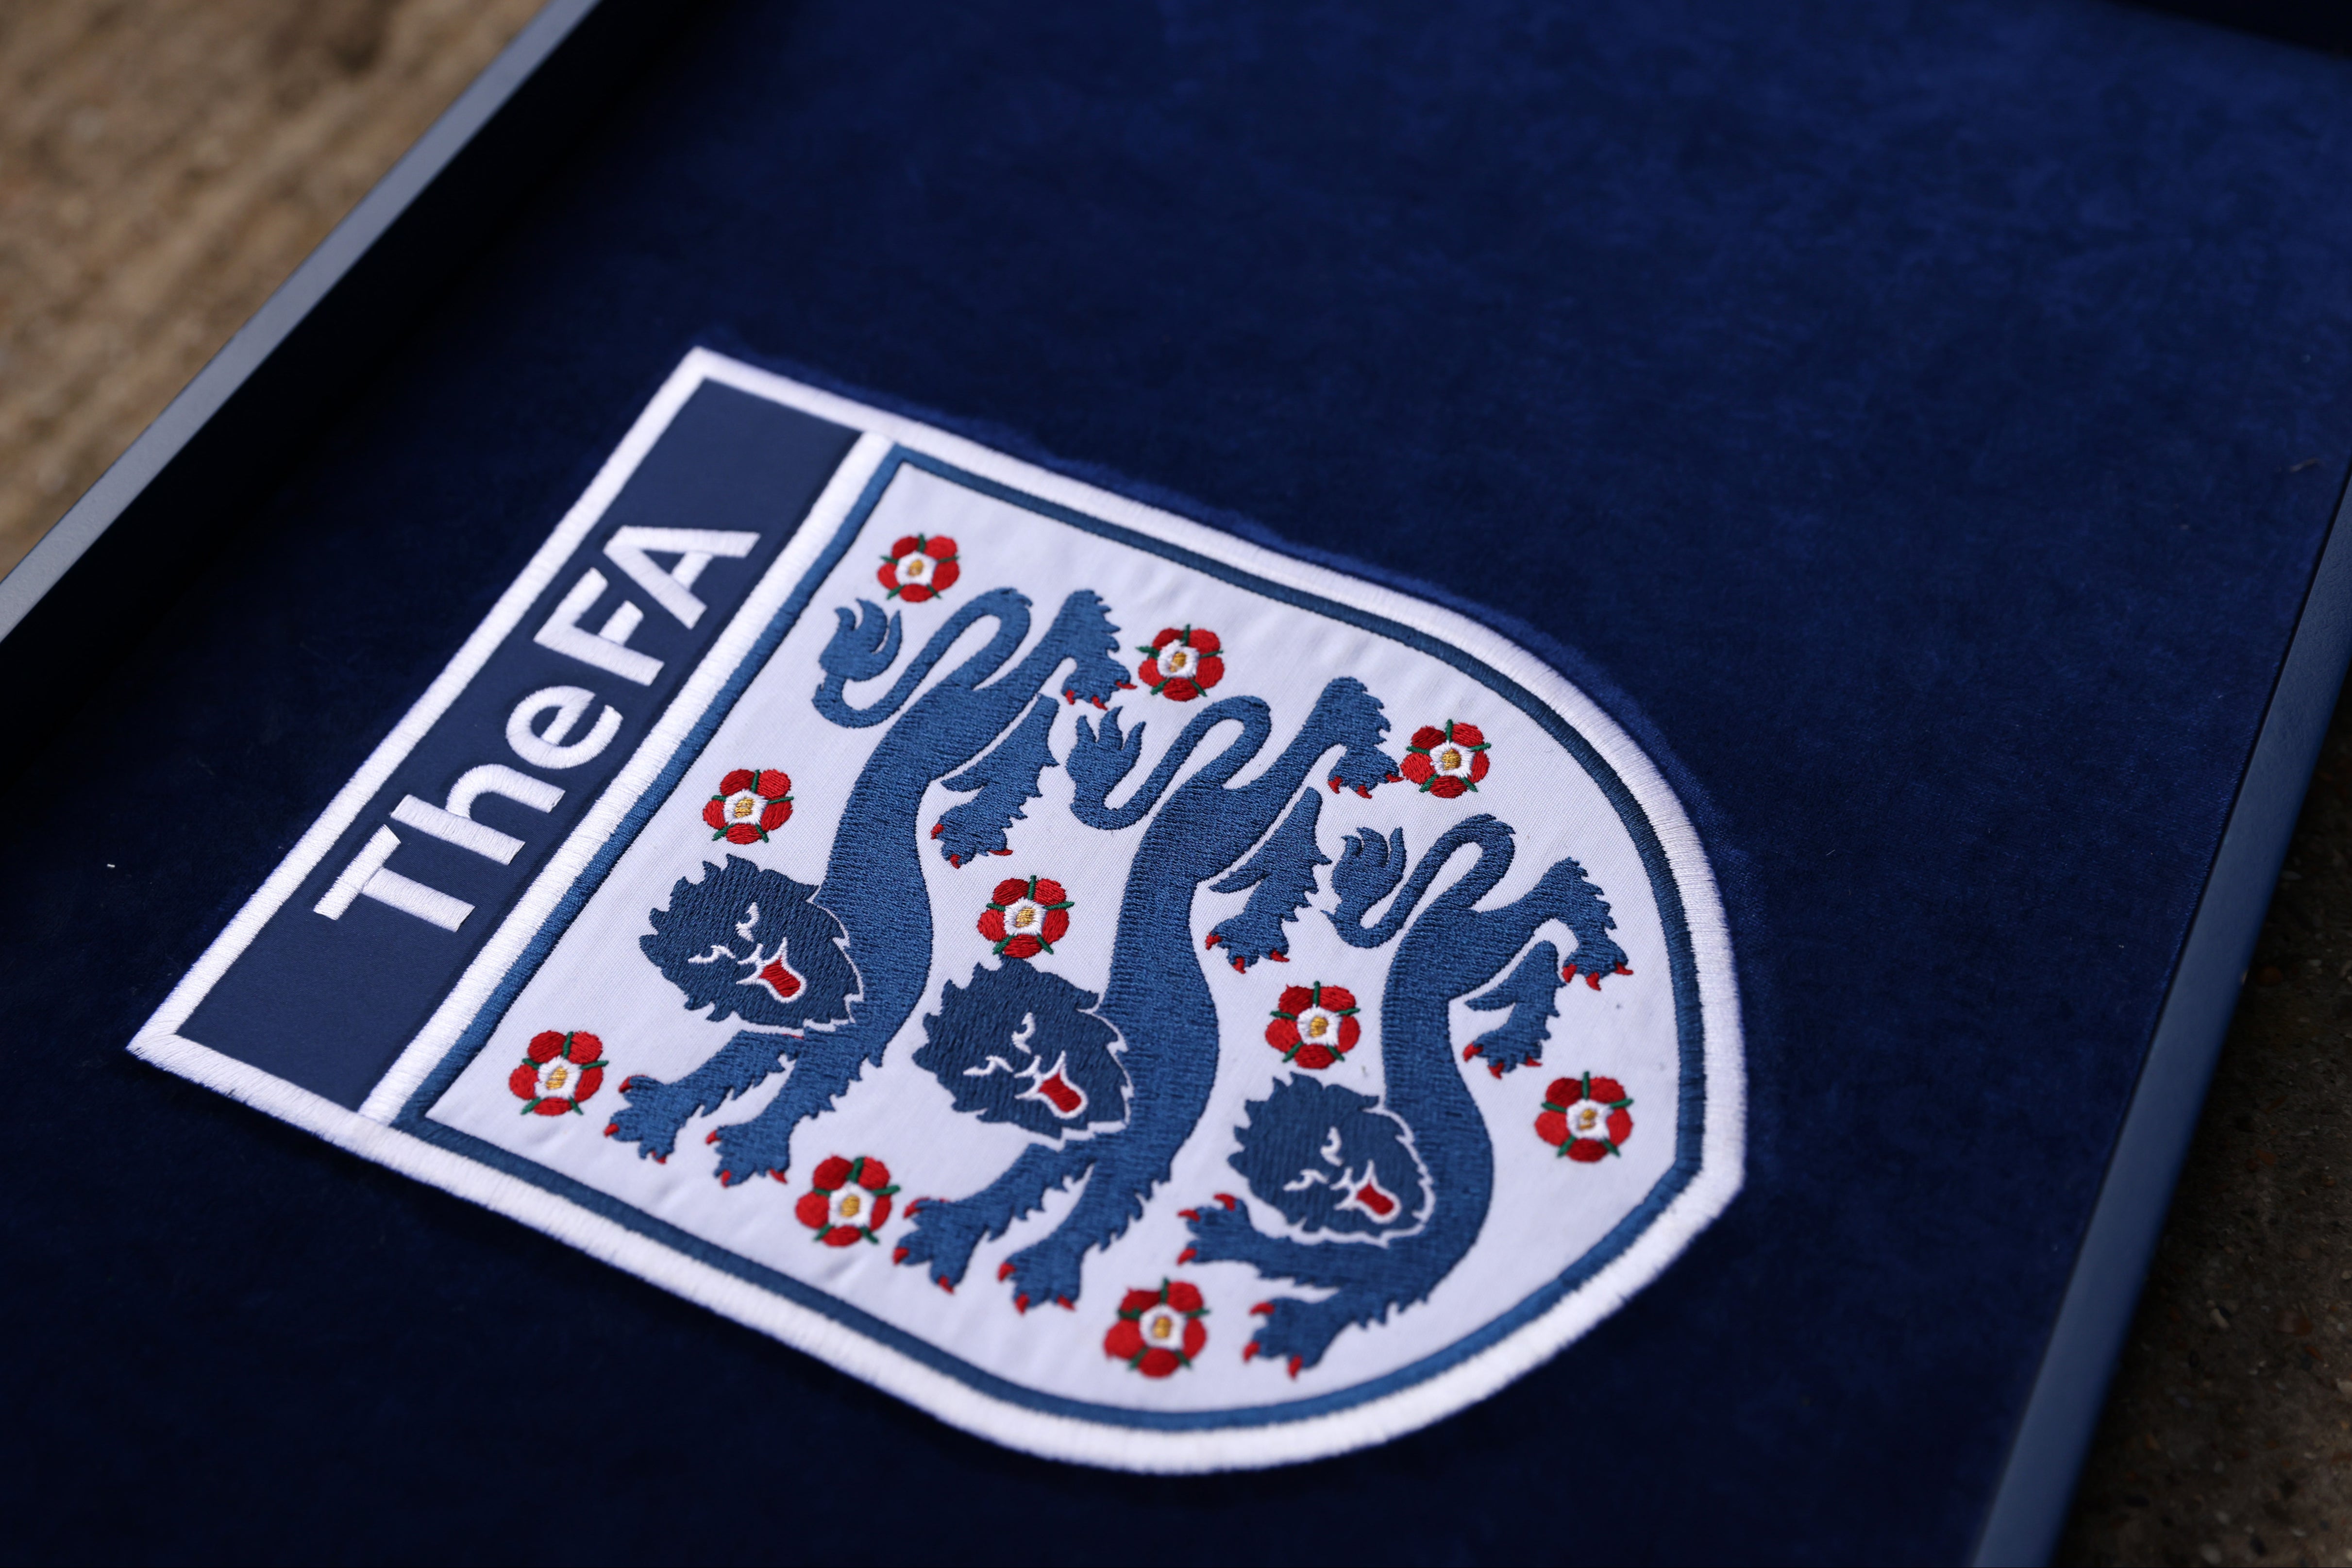 <p>The FA has suspended a council member after a social media post </p>